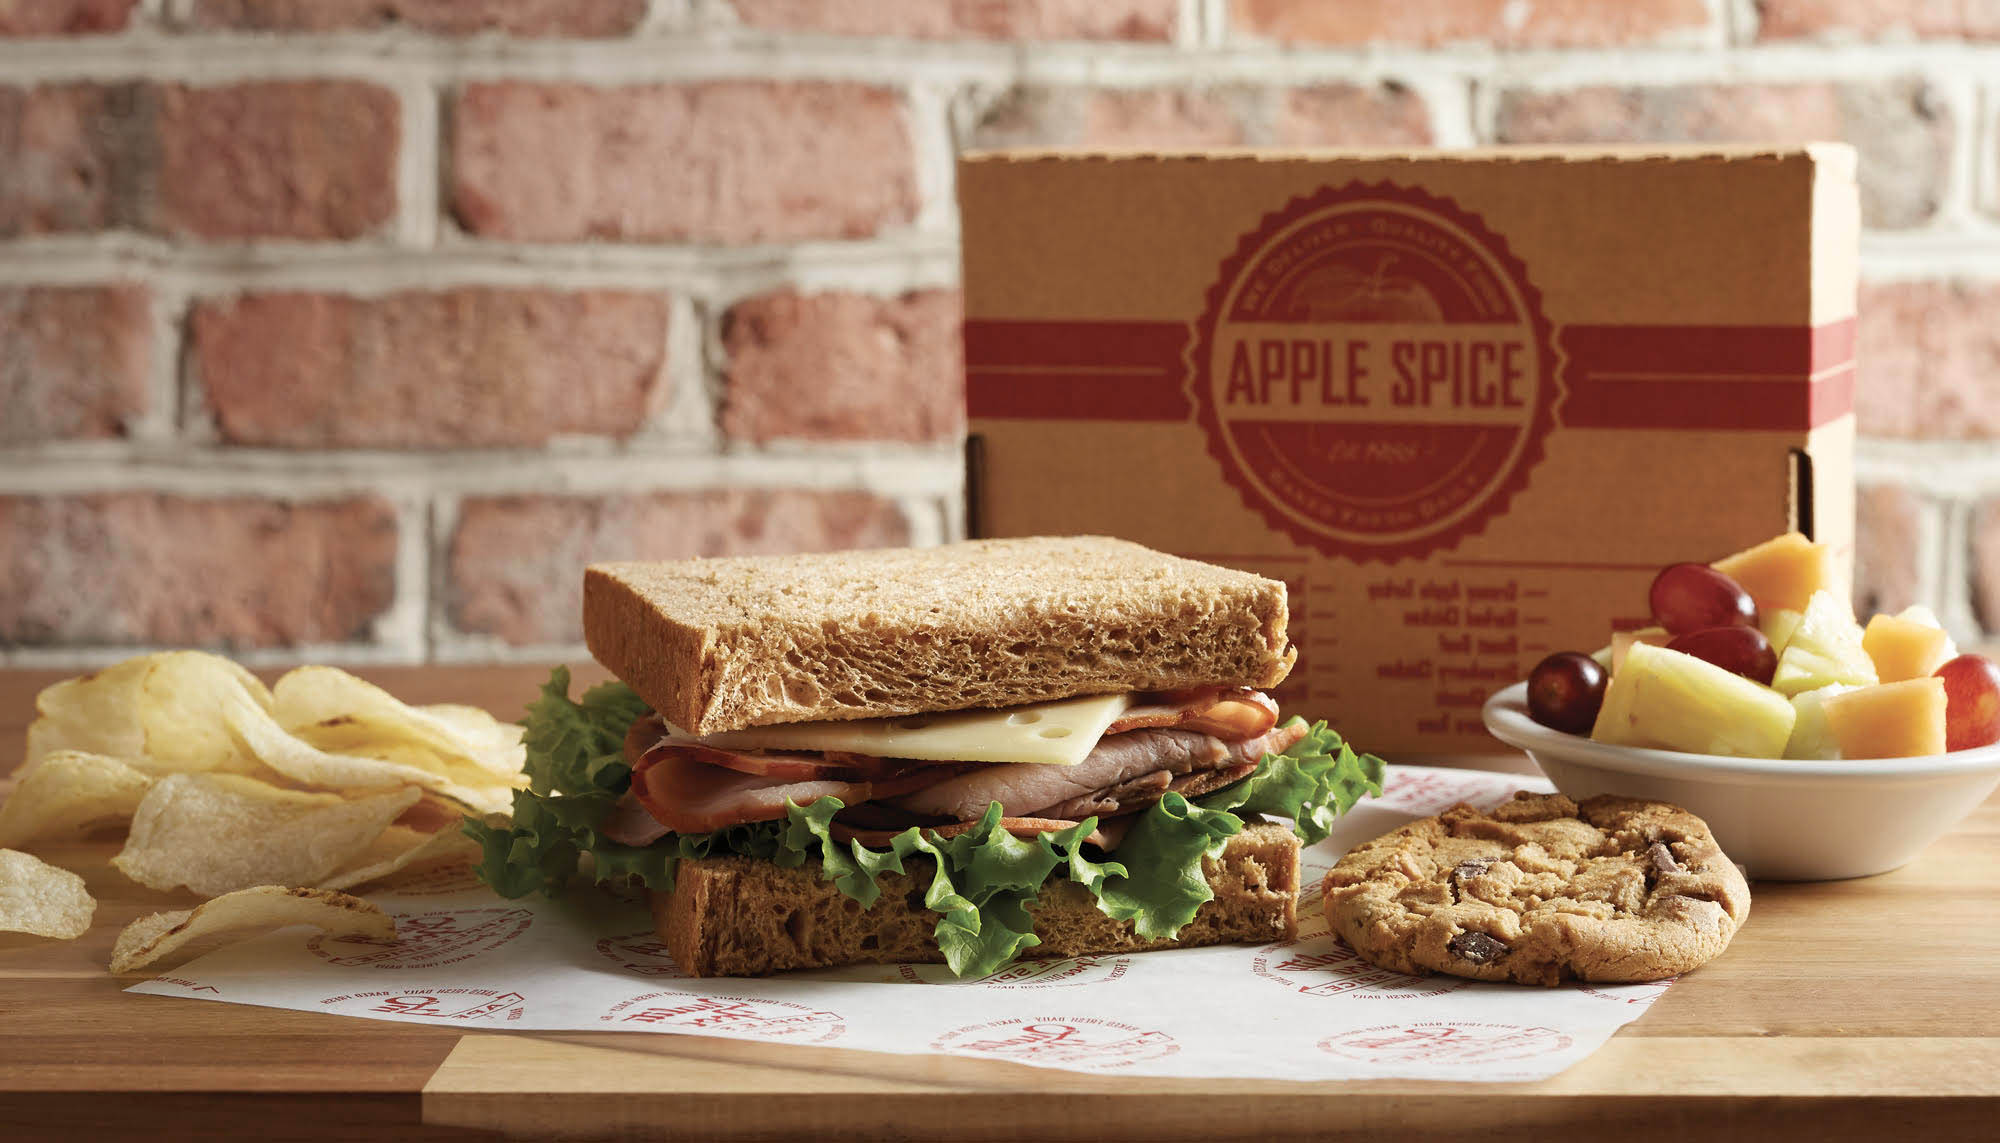 Apple Spice Box Lunch Delivery & Catering Minneapolis/St. Paul, MN